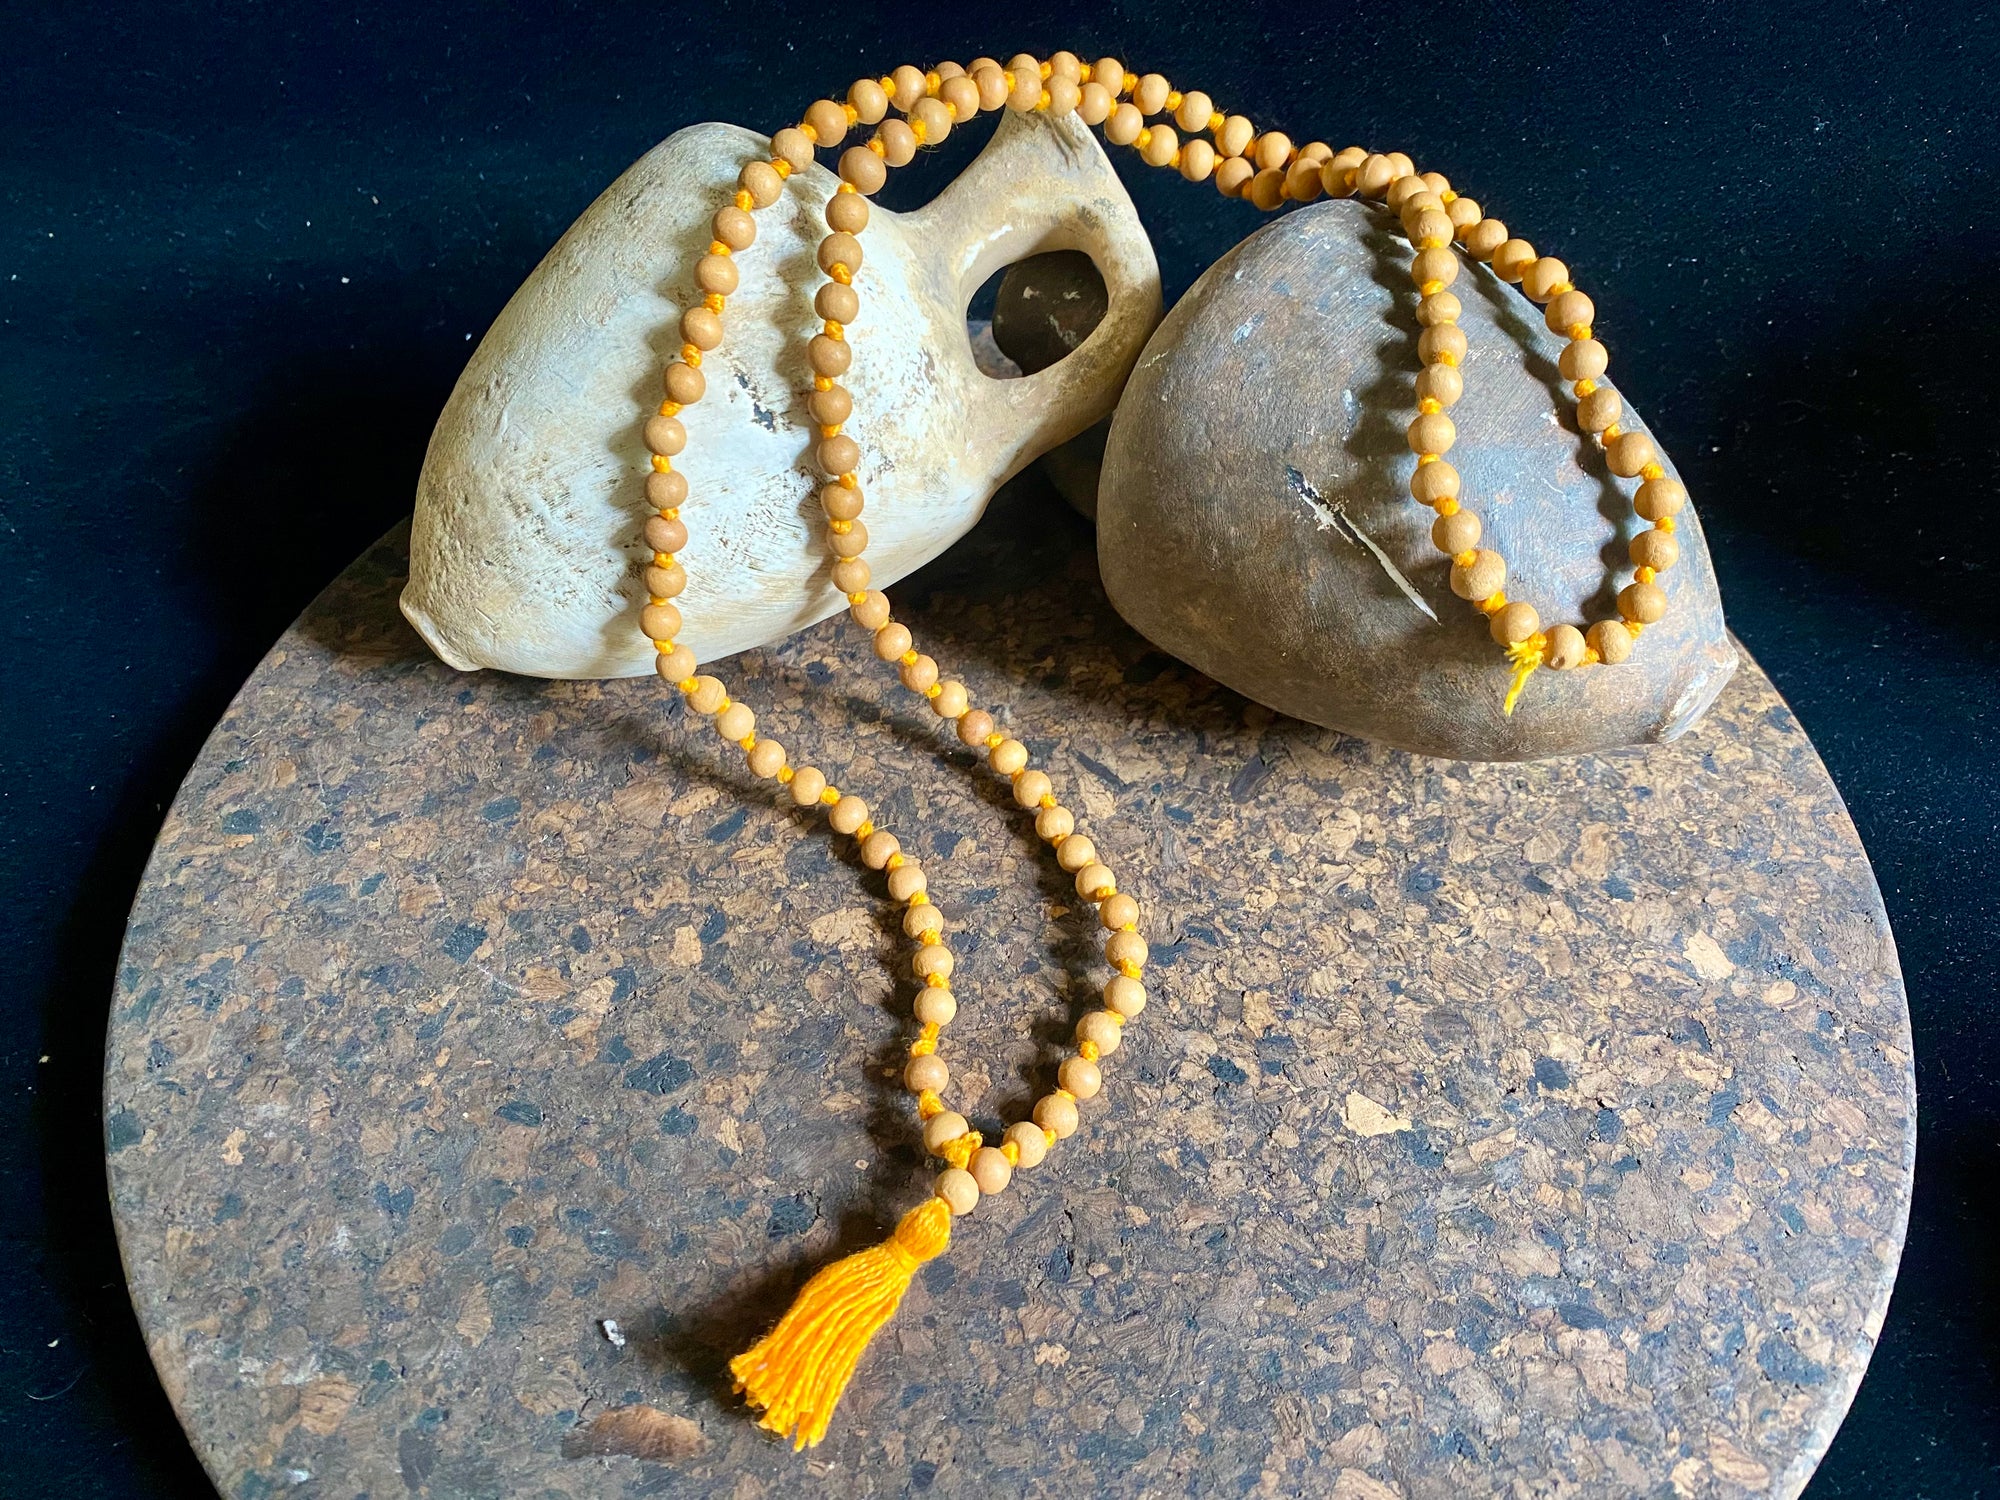 Women or men’s fine sandalwood mala necklace. Made from natural sandalwood. Knotted between each bead. As per a standard Buddhist mala, it contains 108 beads. Each bead 5 mm diameter